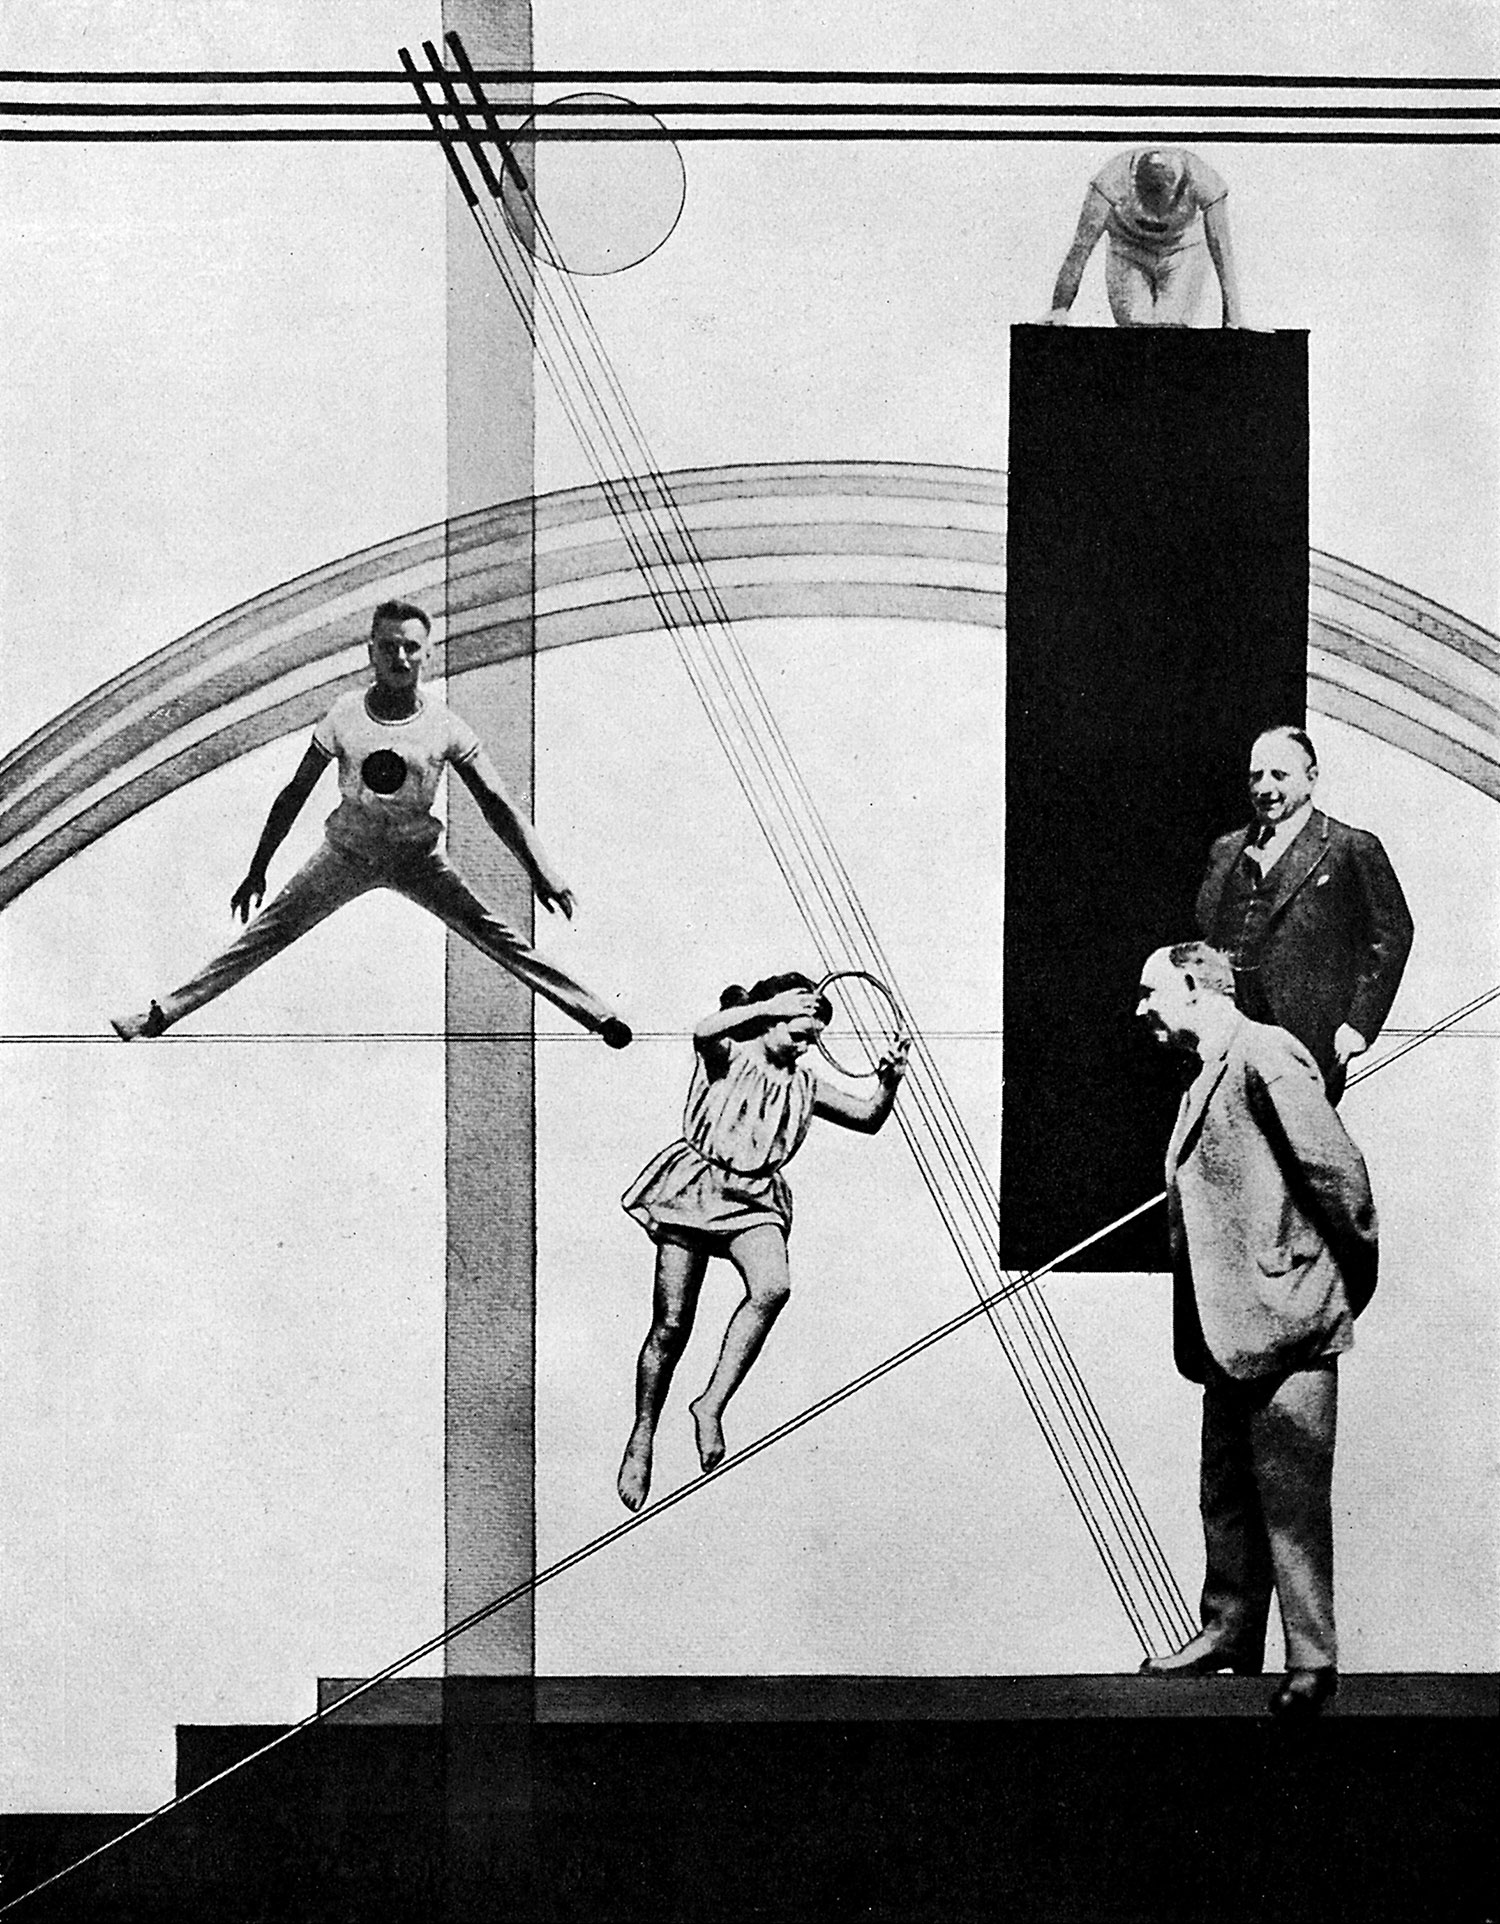 From LÃ¡szlÃ³ Moholy-Nagy, Painting, Photography, Film